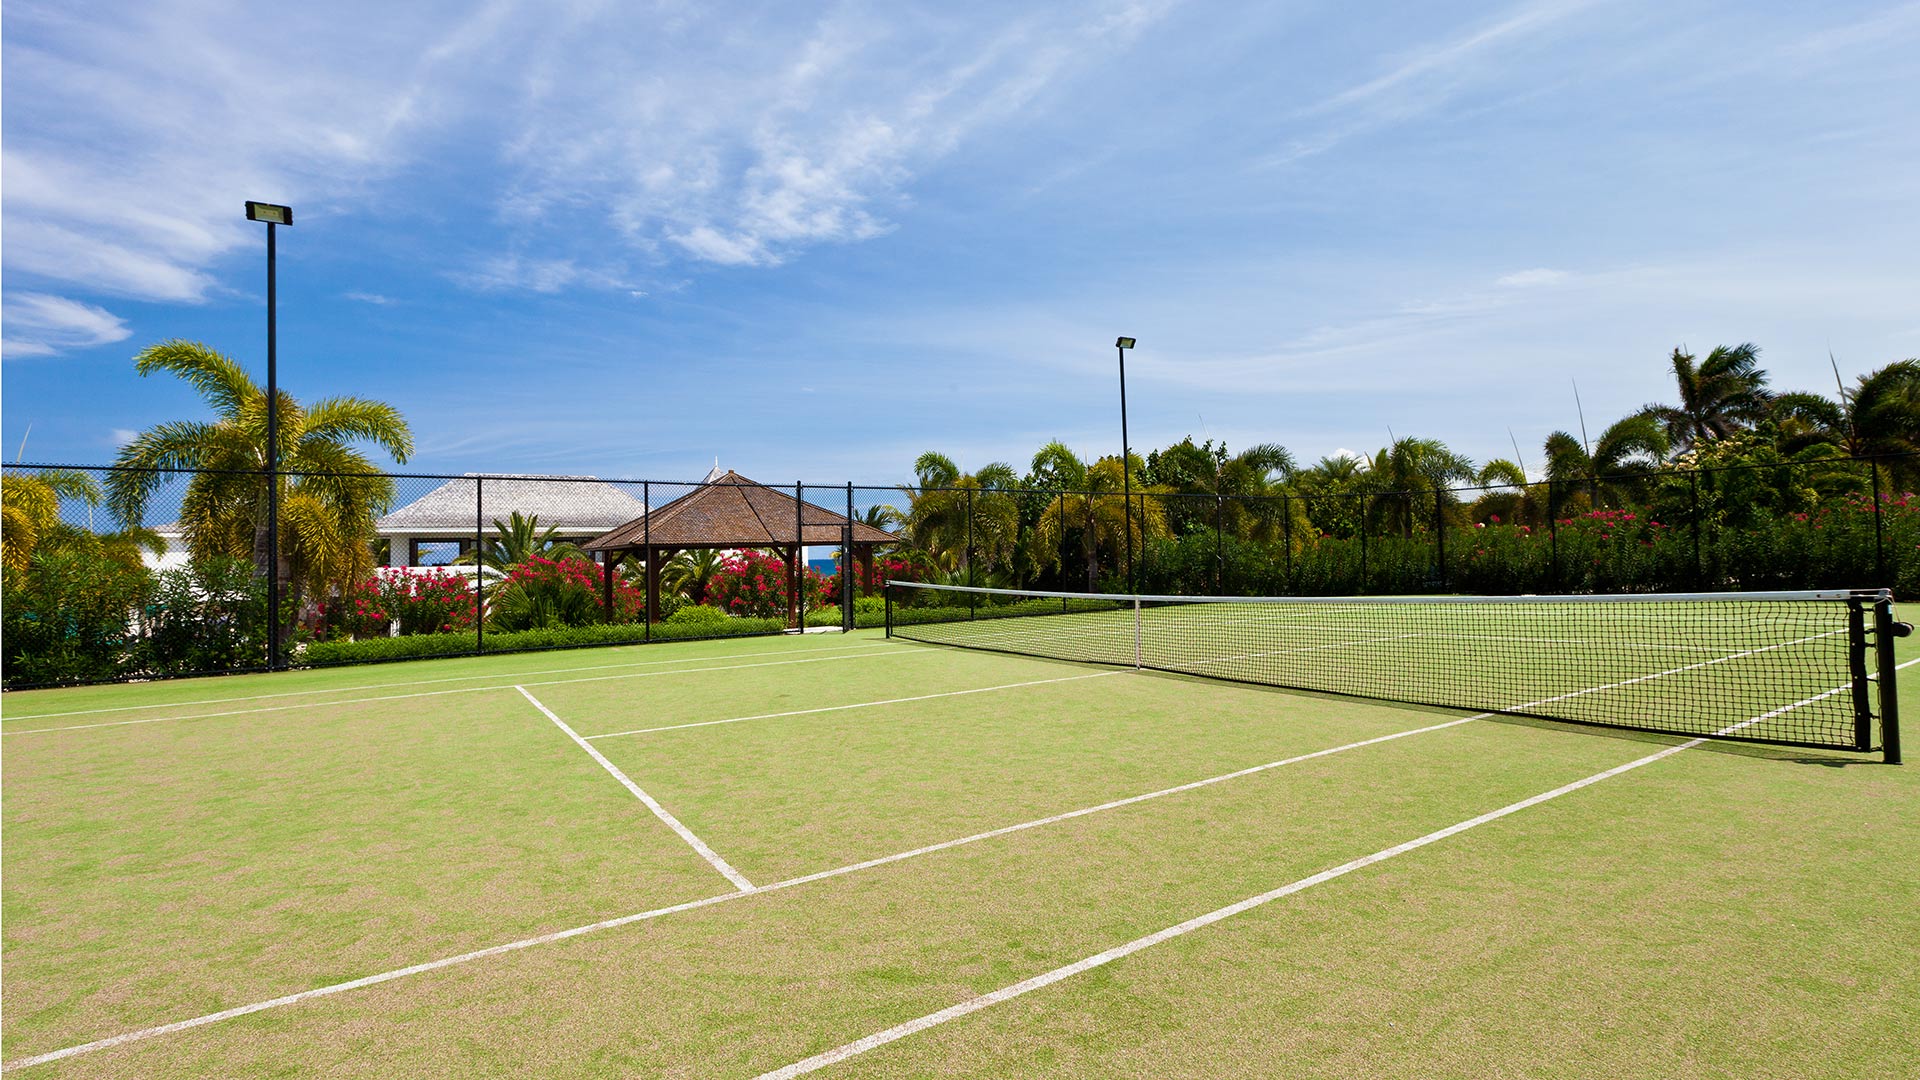 A private tennis court is one of the many special amenities that make Le Bleu Villa on Anguilla a dream vacation rental villa.
